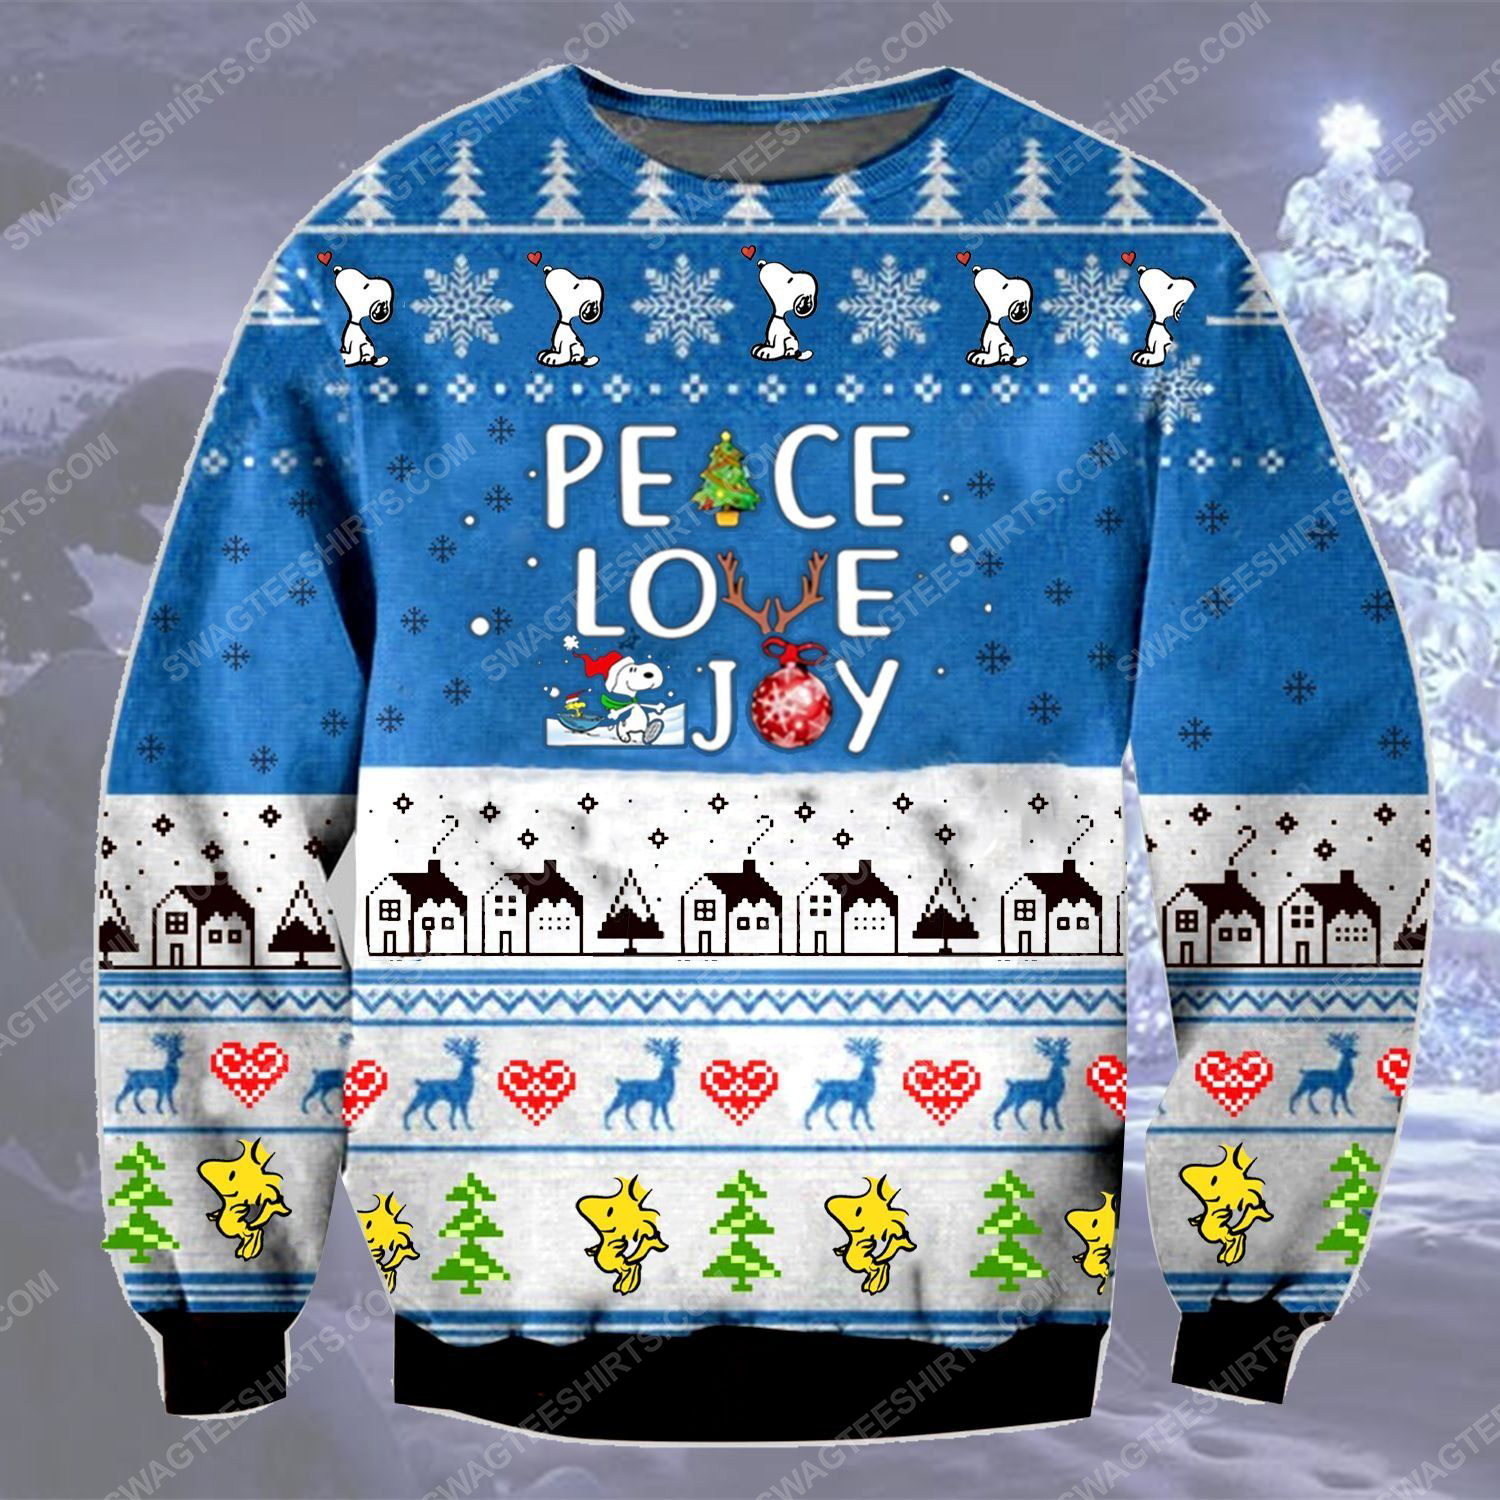 Charlie brown and snoopy peace love joy ugly christmas sweater - Copy (2)